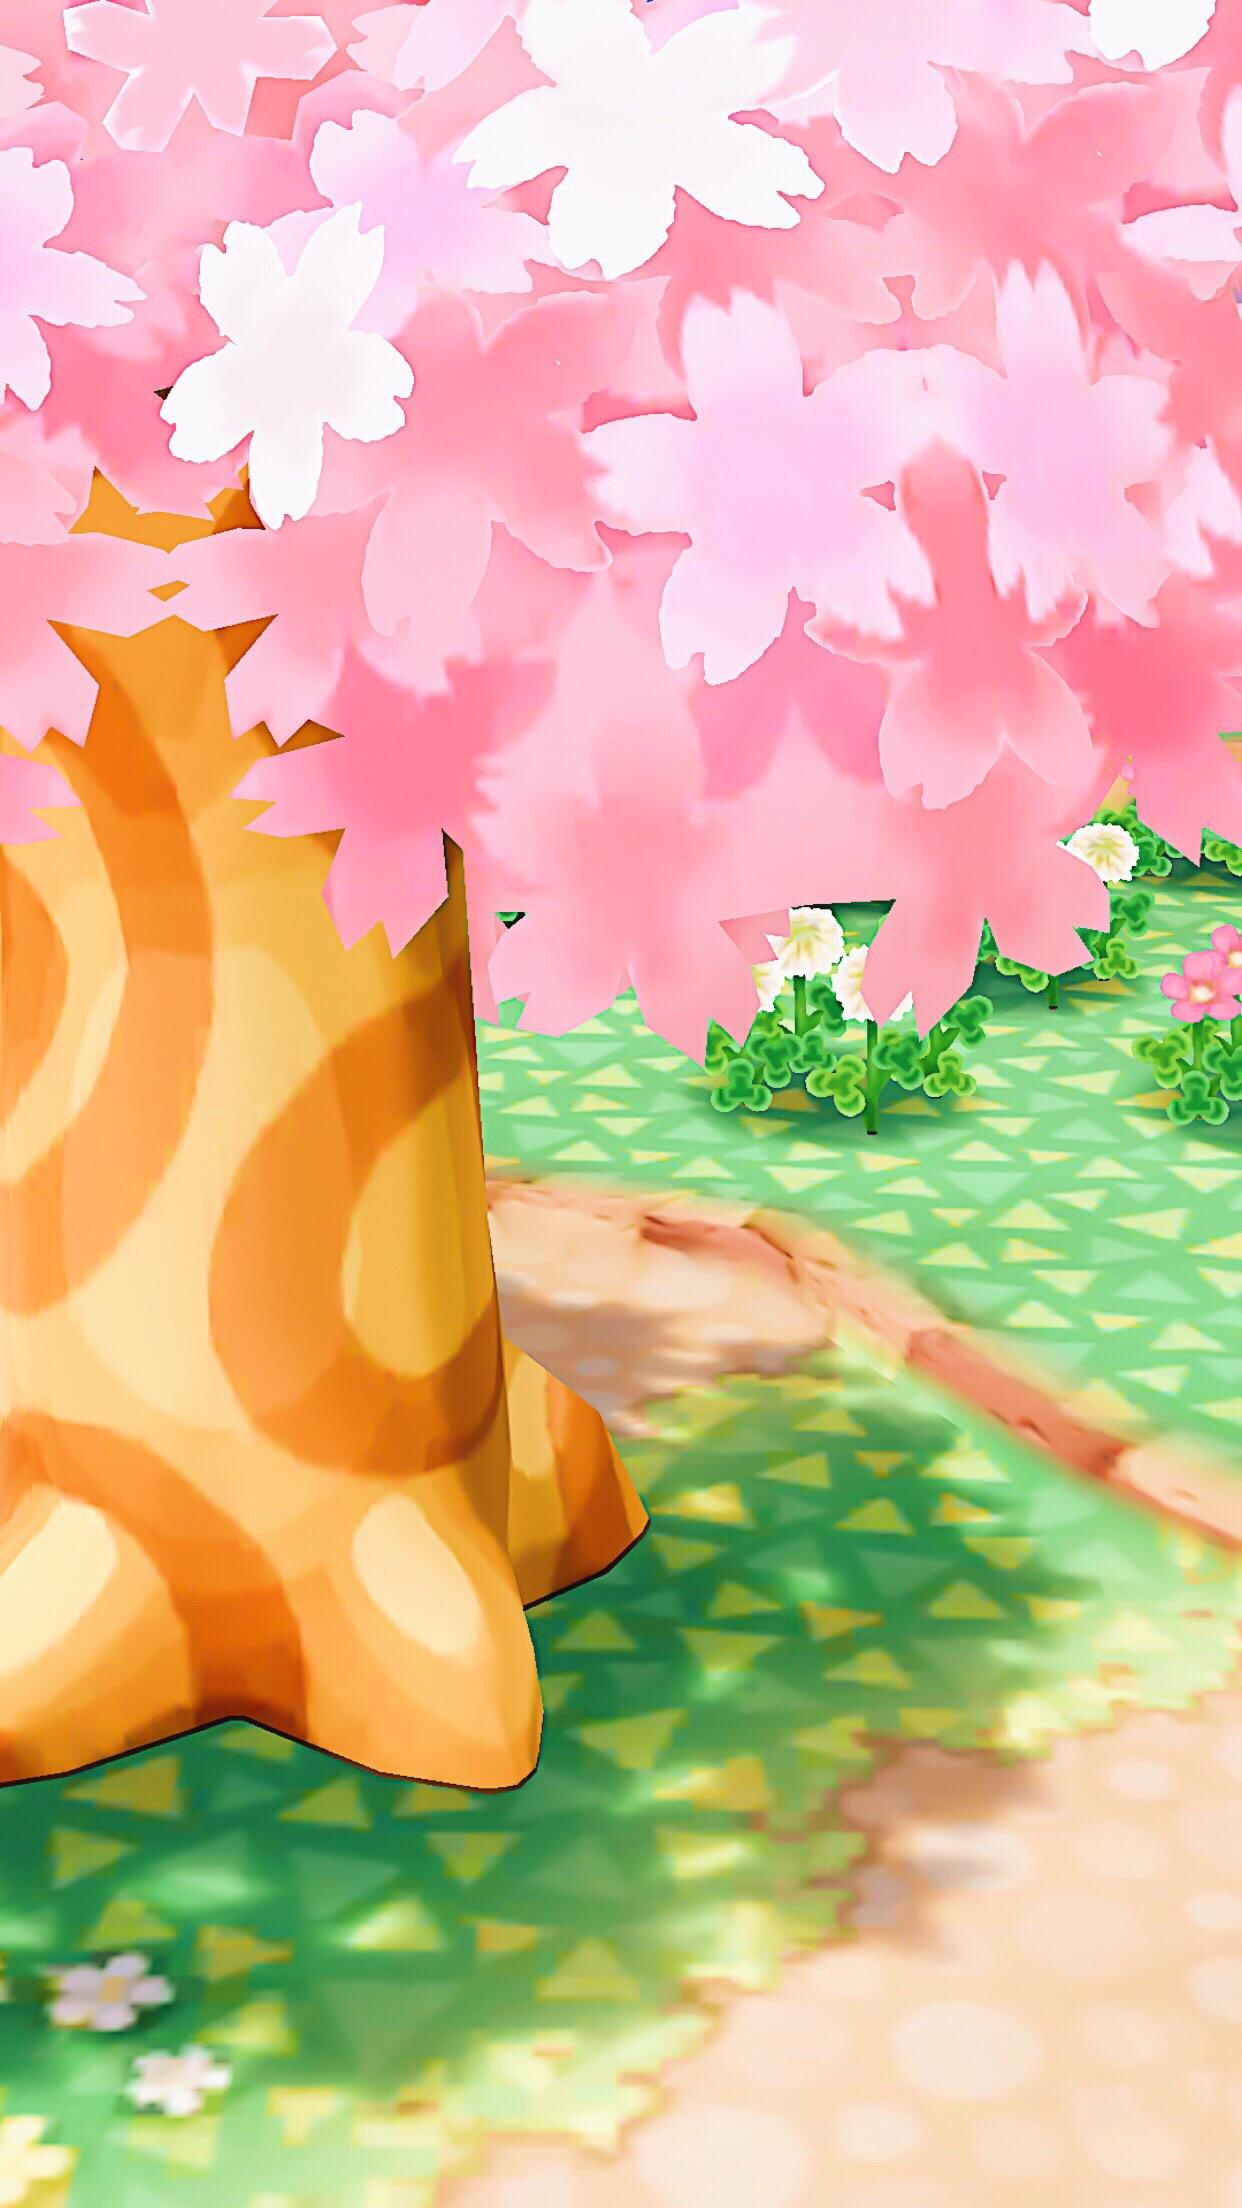 My new favourite Animal Crossing wallpaper for my phone. Who doesn't love cherry blossoms?